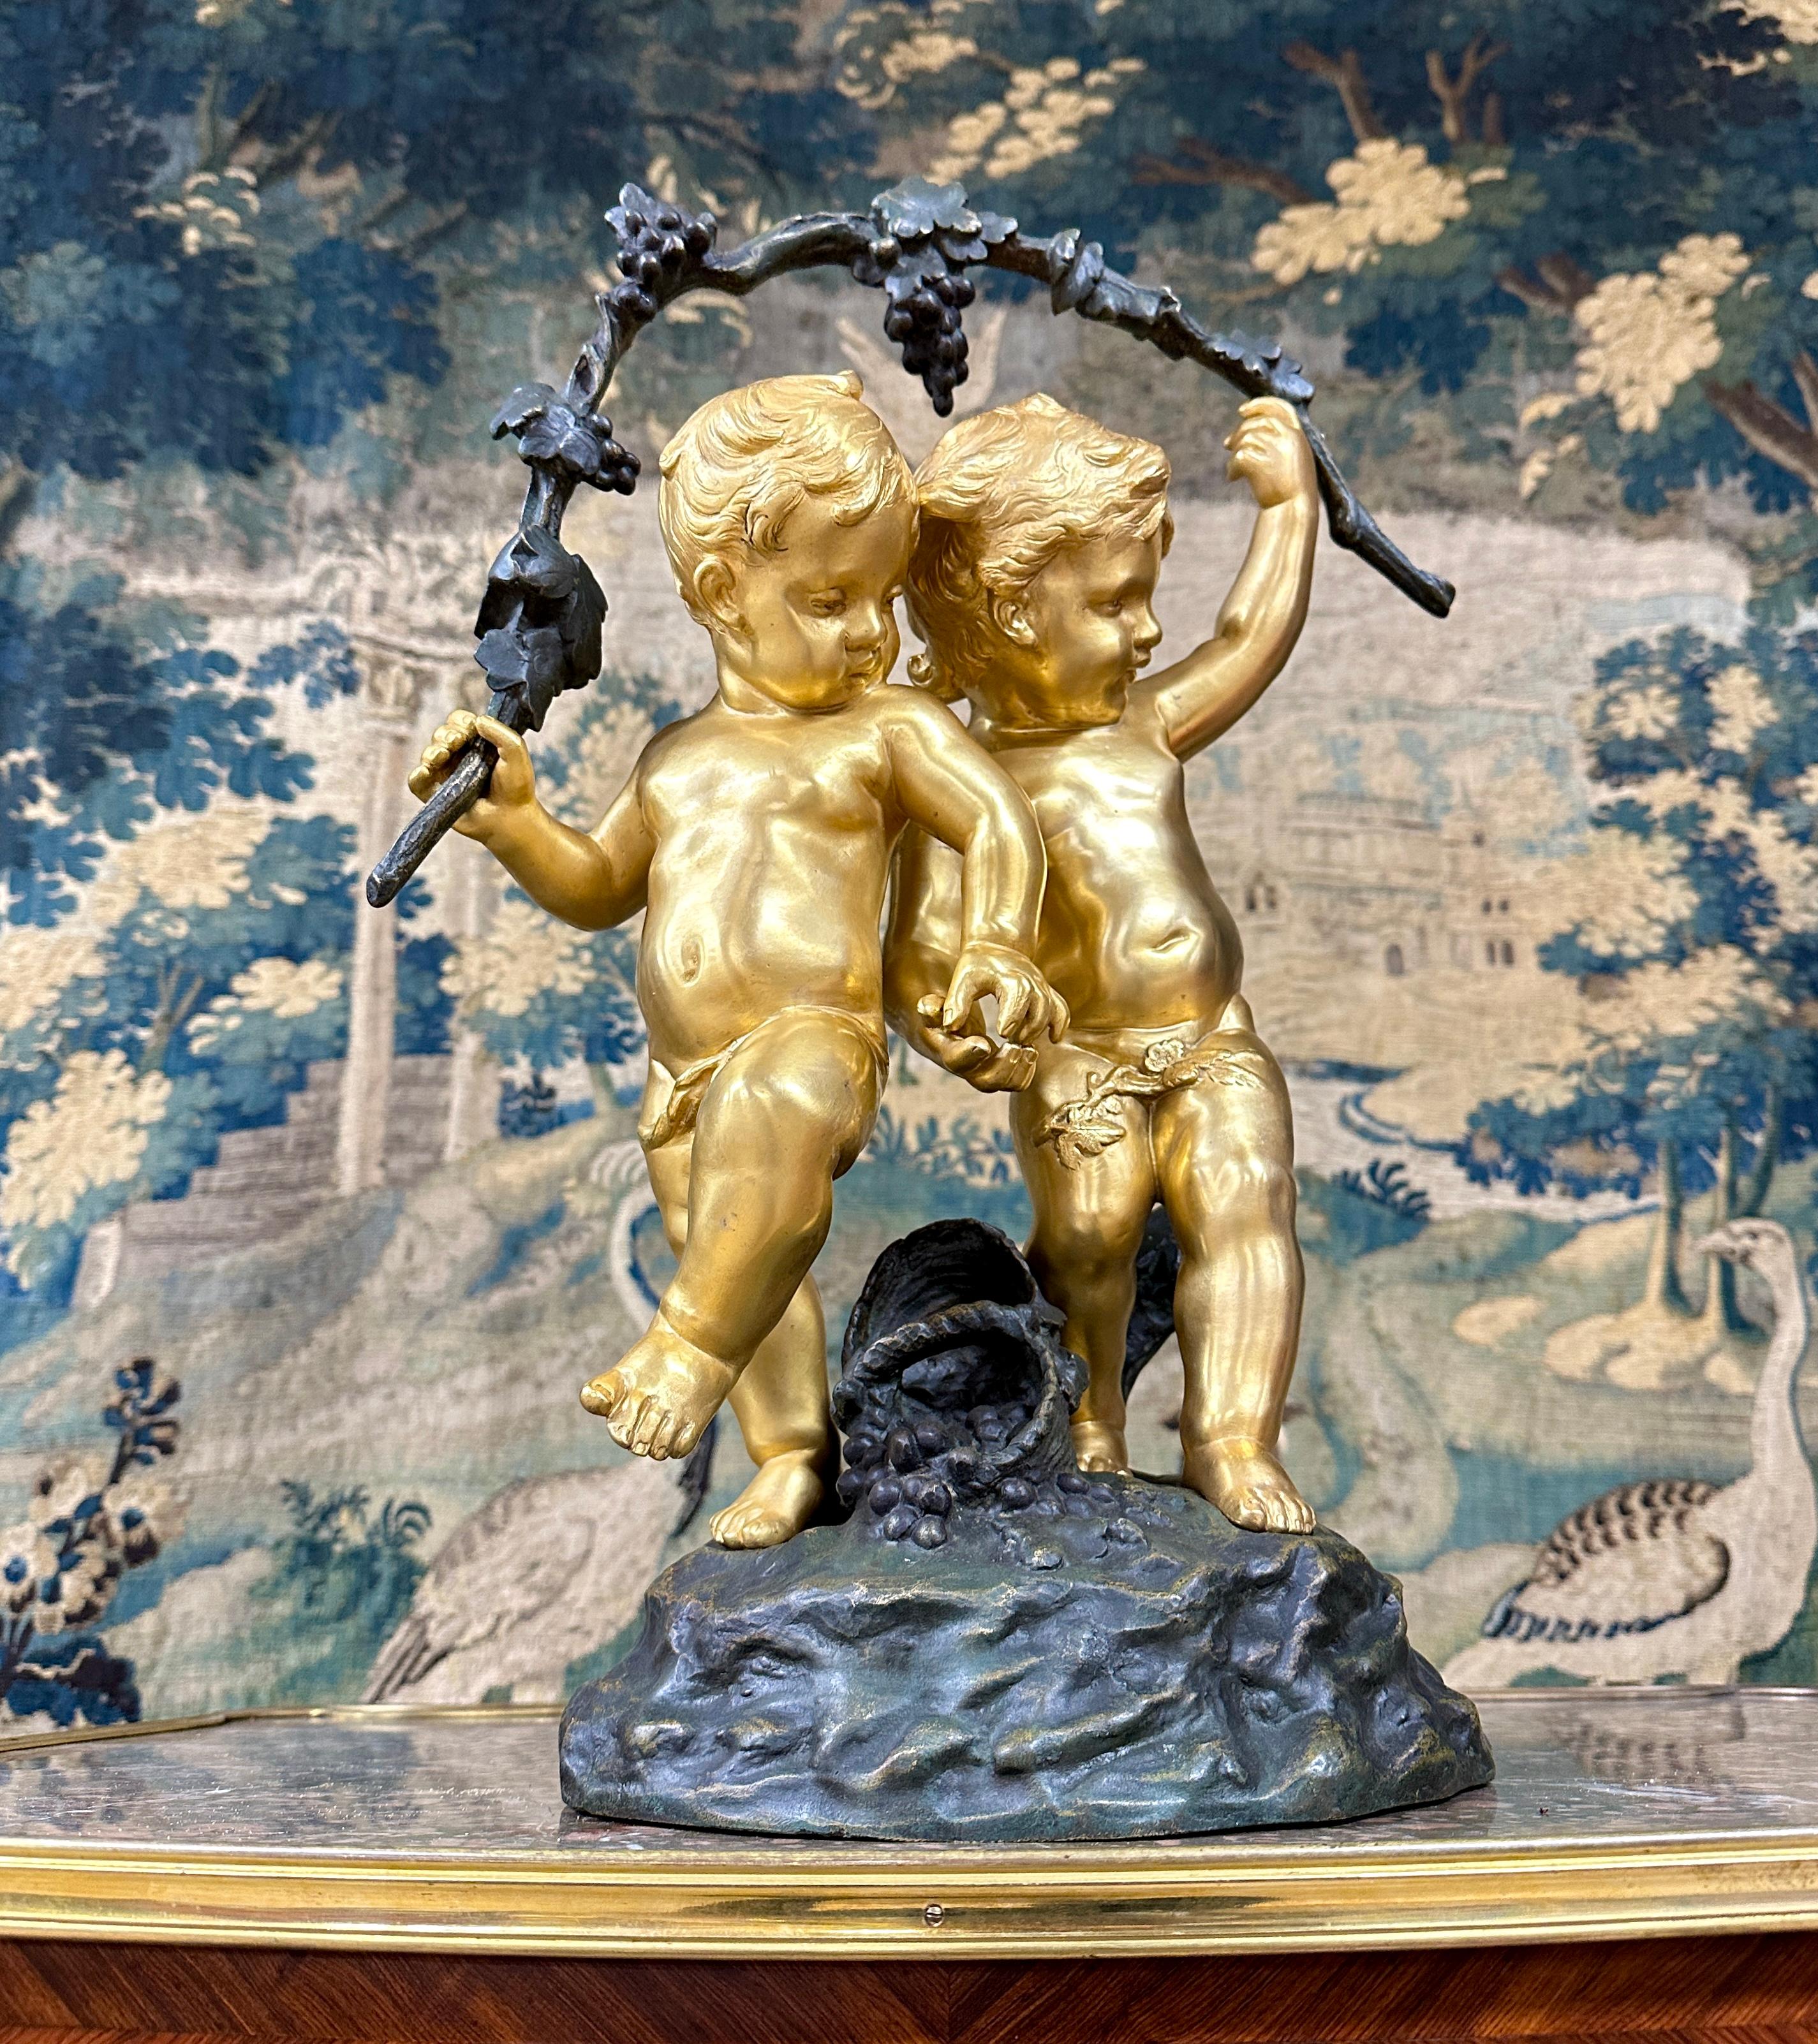 Auguste Moreau, two putti carrying bunches of grapes, shown hand in hand with a basket of grapes at their feet. Work in patinated bronze and gilded bronze signed on the terrace by 